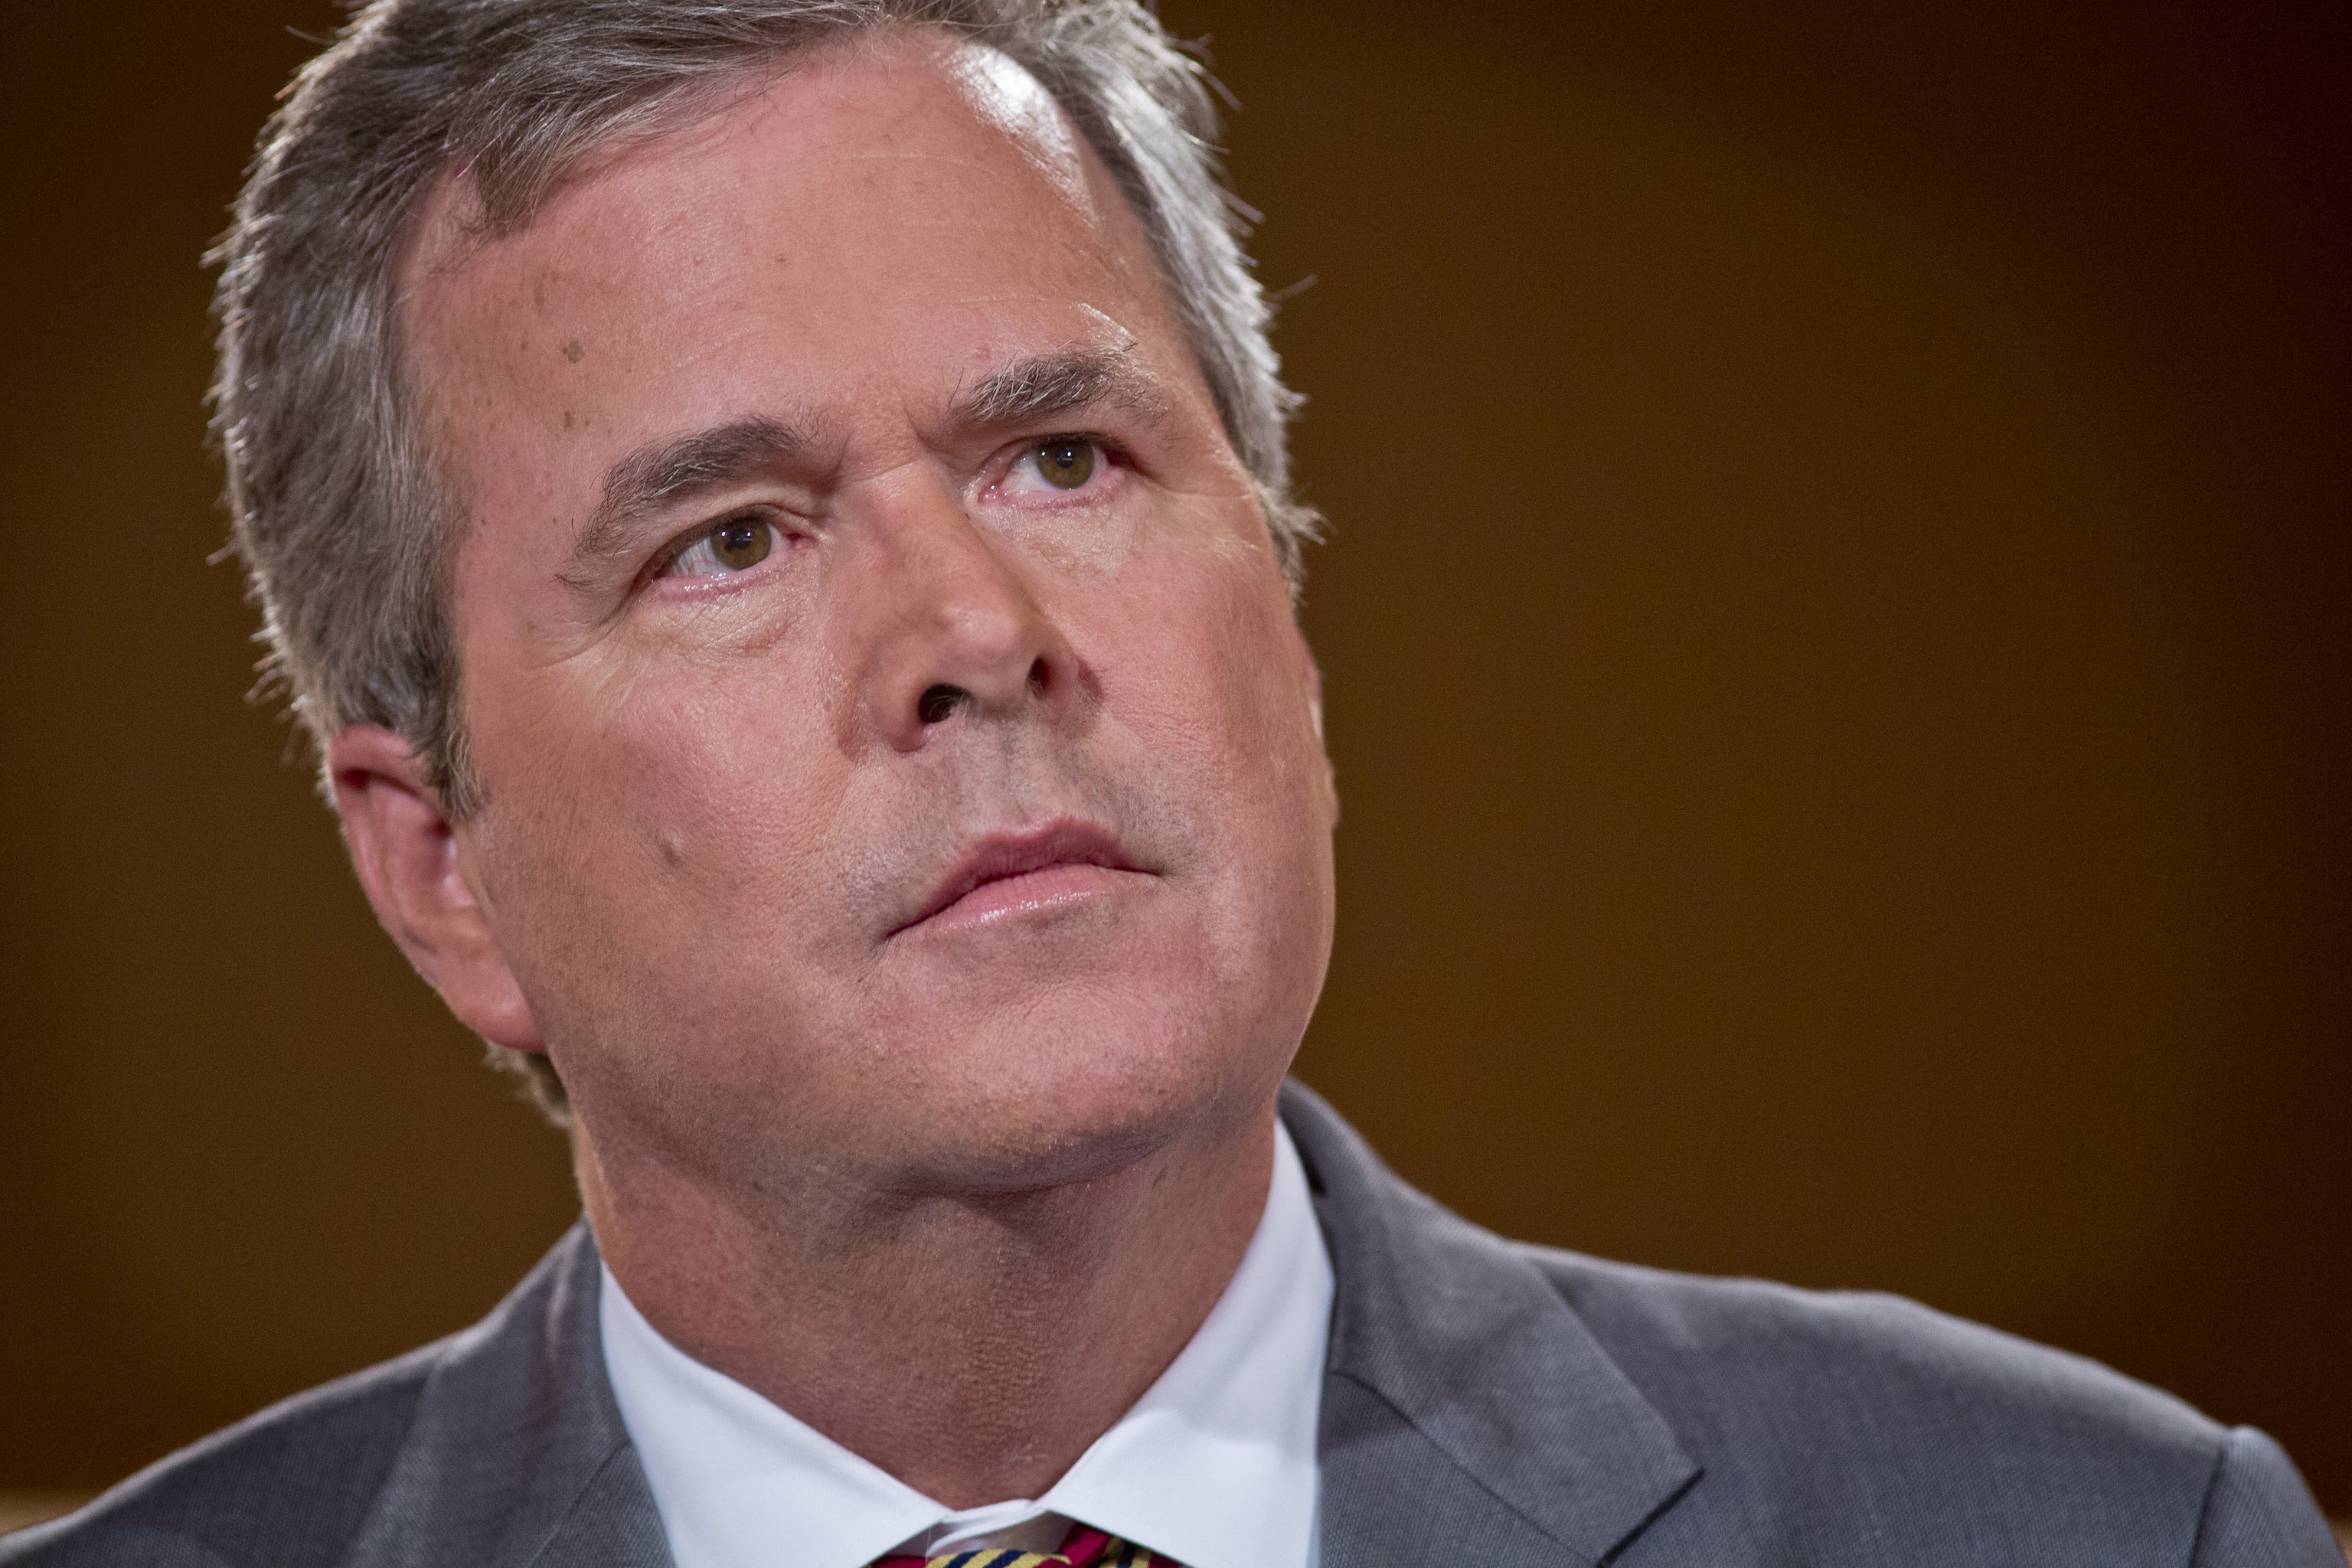 Pictured is Florida Governor Jeb Bush during a Piers Morgan interview at the 2012 Republican National Convention in Tampa, Florida. (CNN)